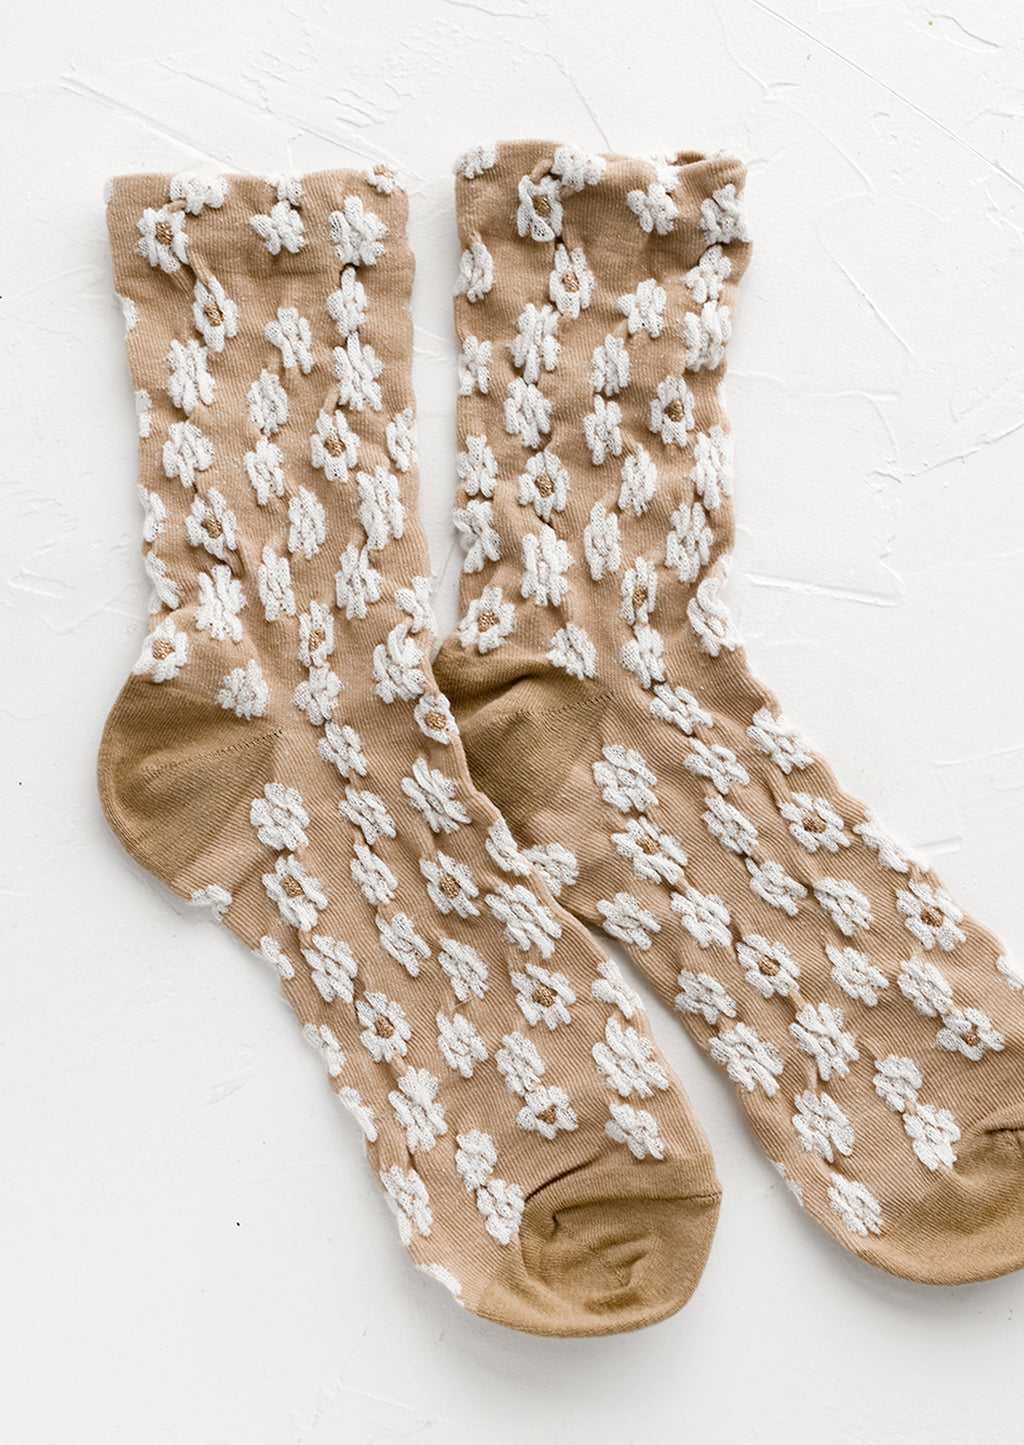 Tan: A pair of non-sheer yellow socks in tan with allover white daisy pattern.